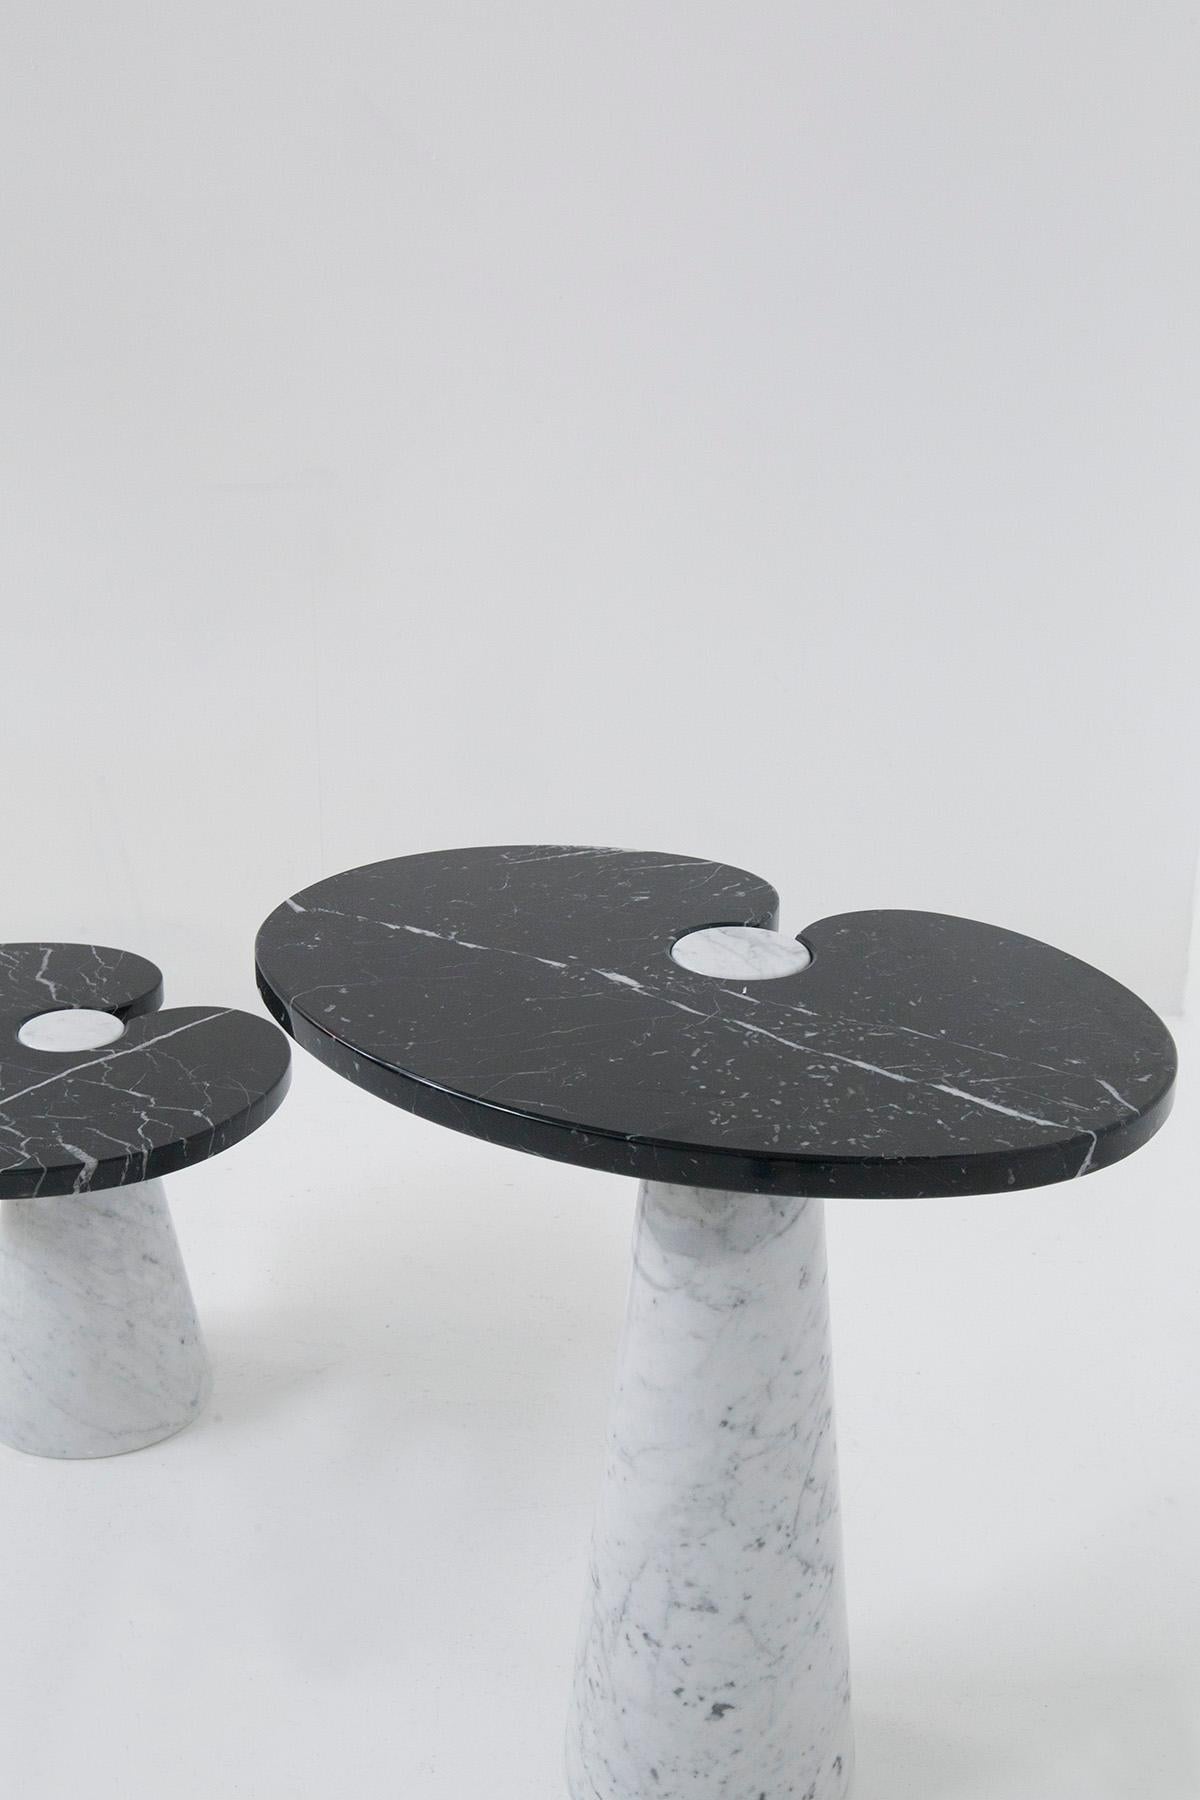 Mid-Century Modern Angelo Mangiarotti Side Tables for Skipper Rare Black and White Colour